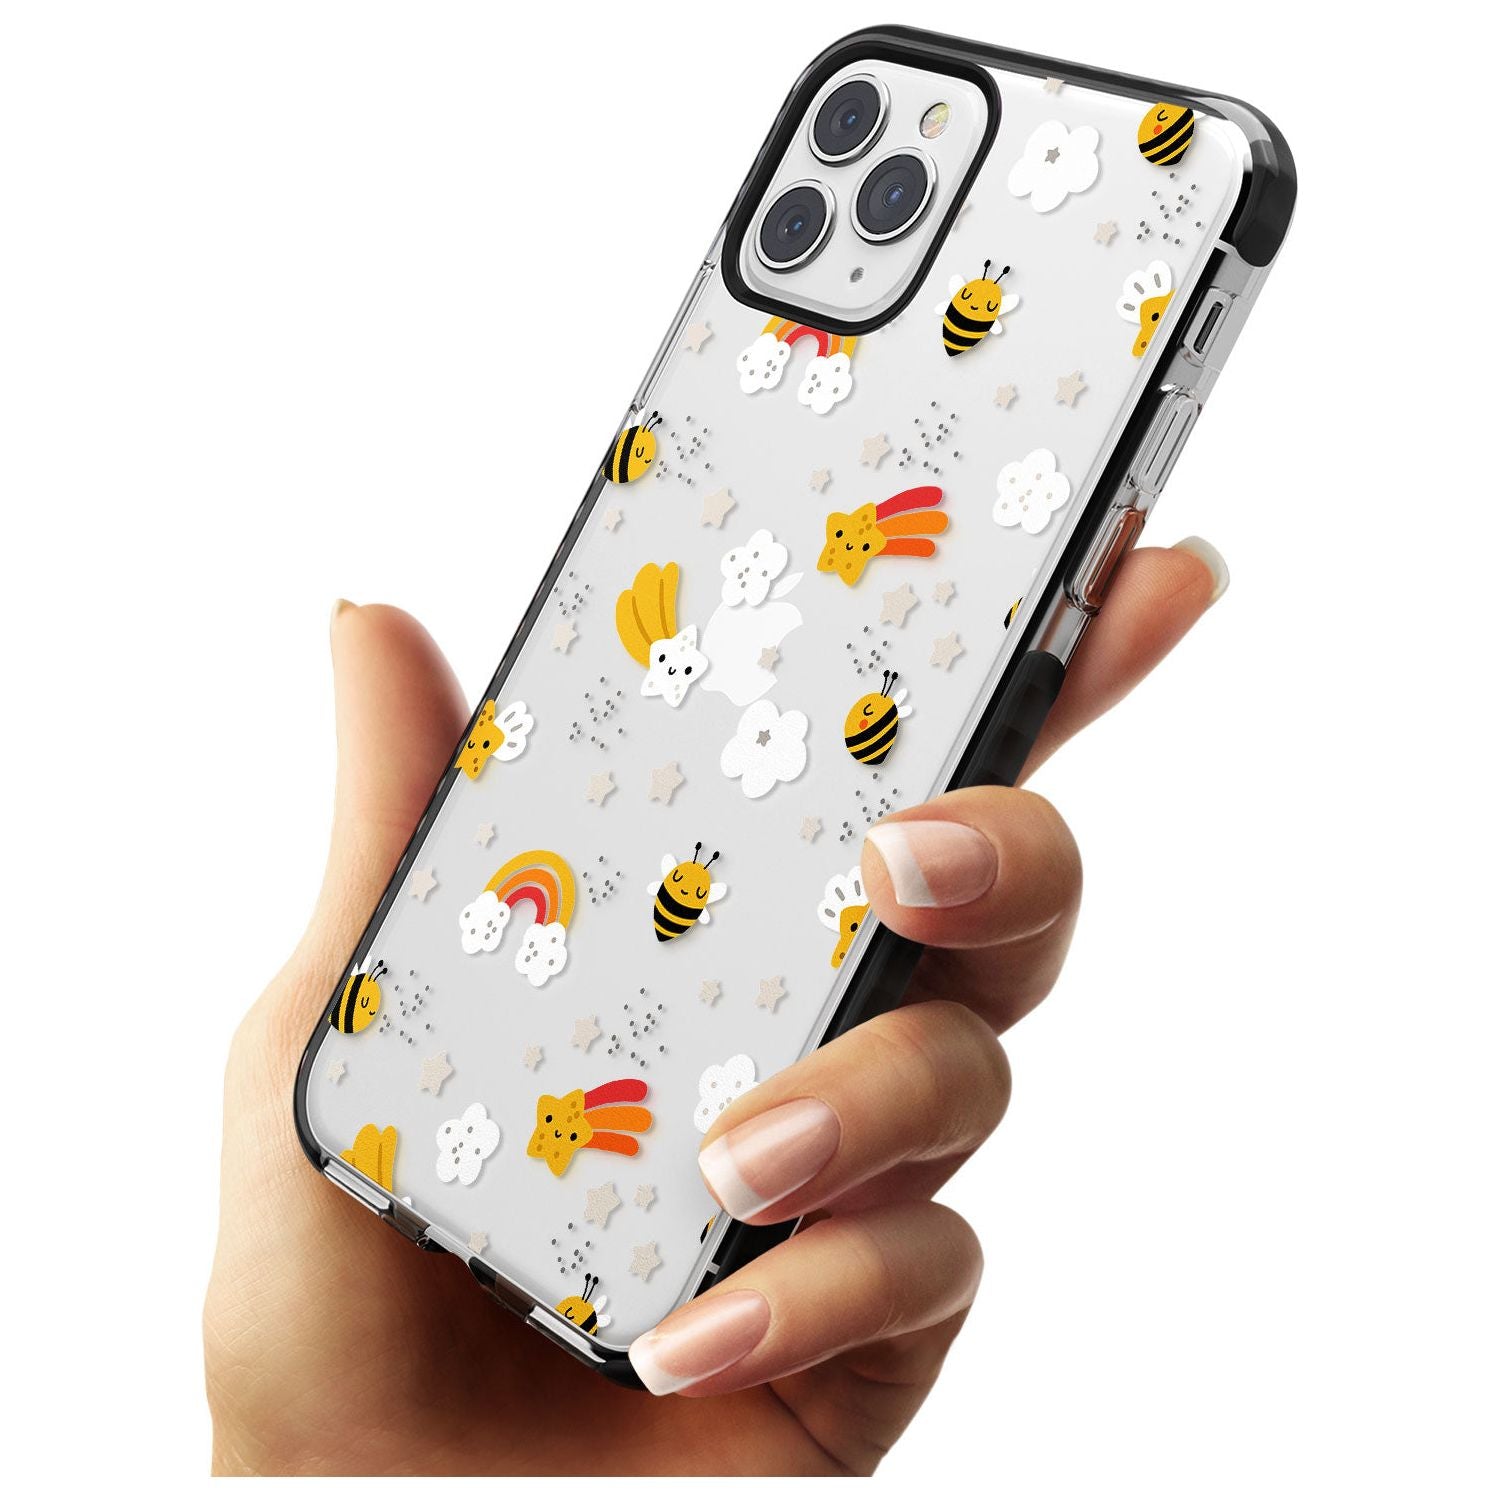 Busy Bee Black Impact Phone Case for iPhone 11 Pro Max